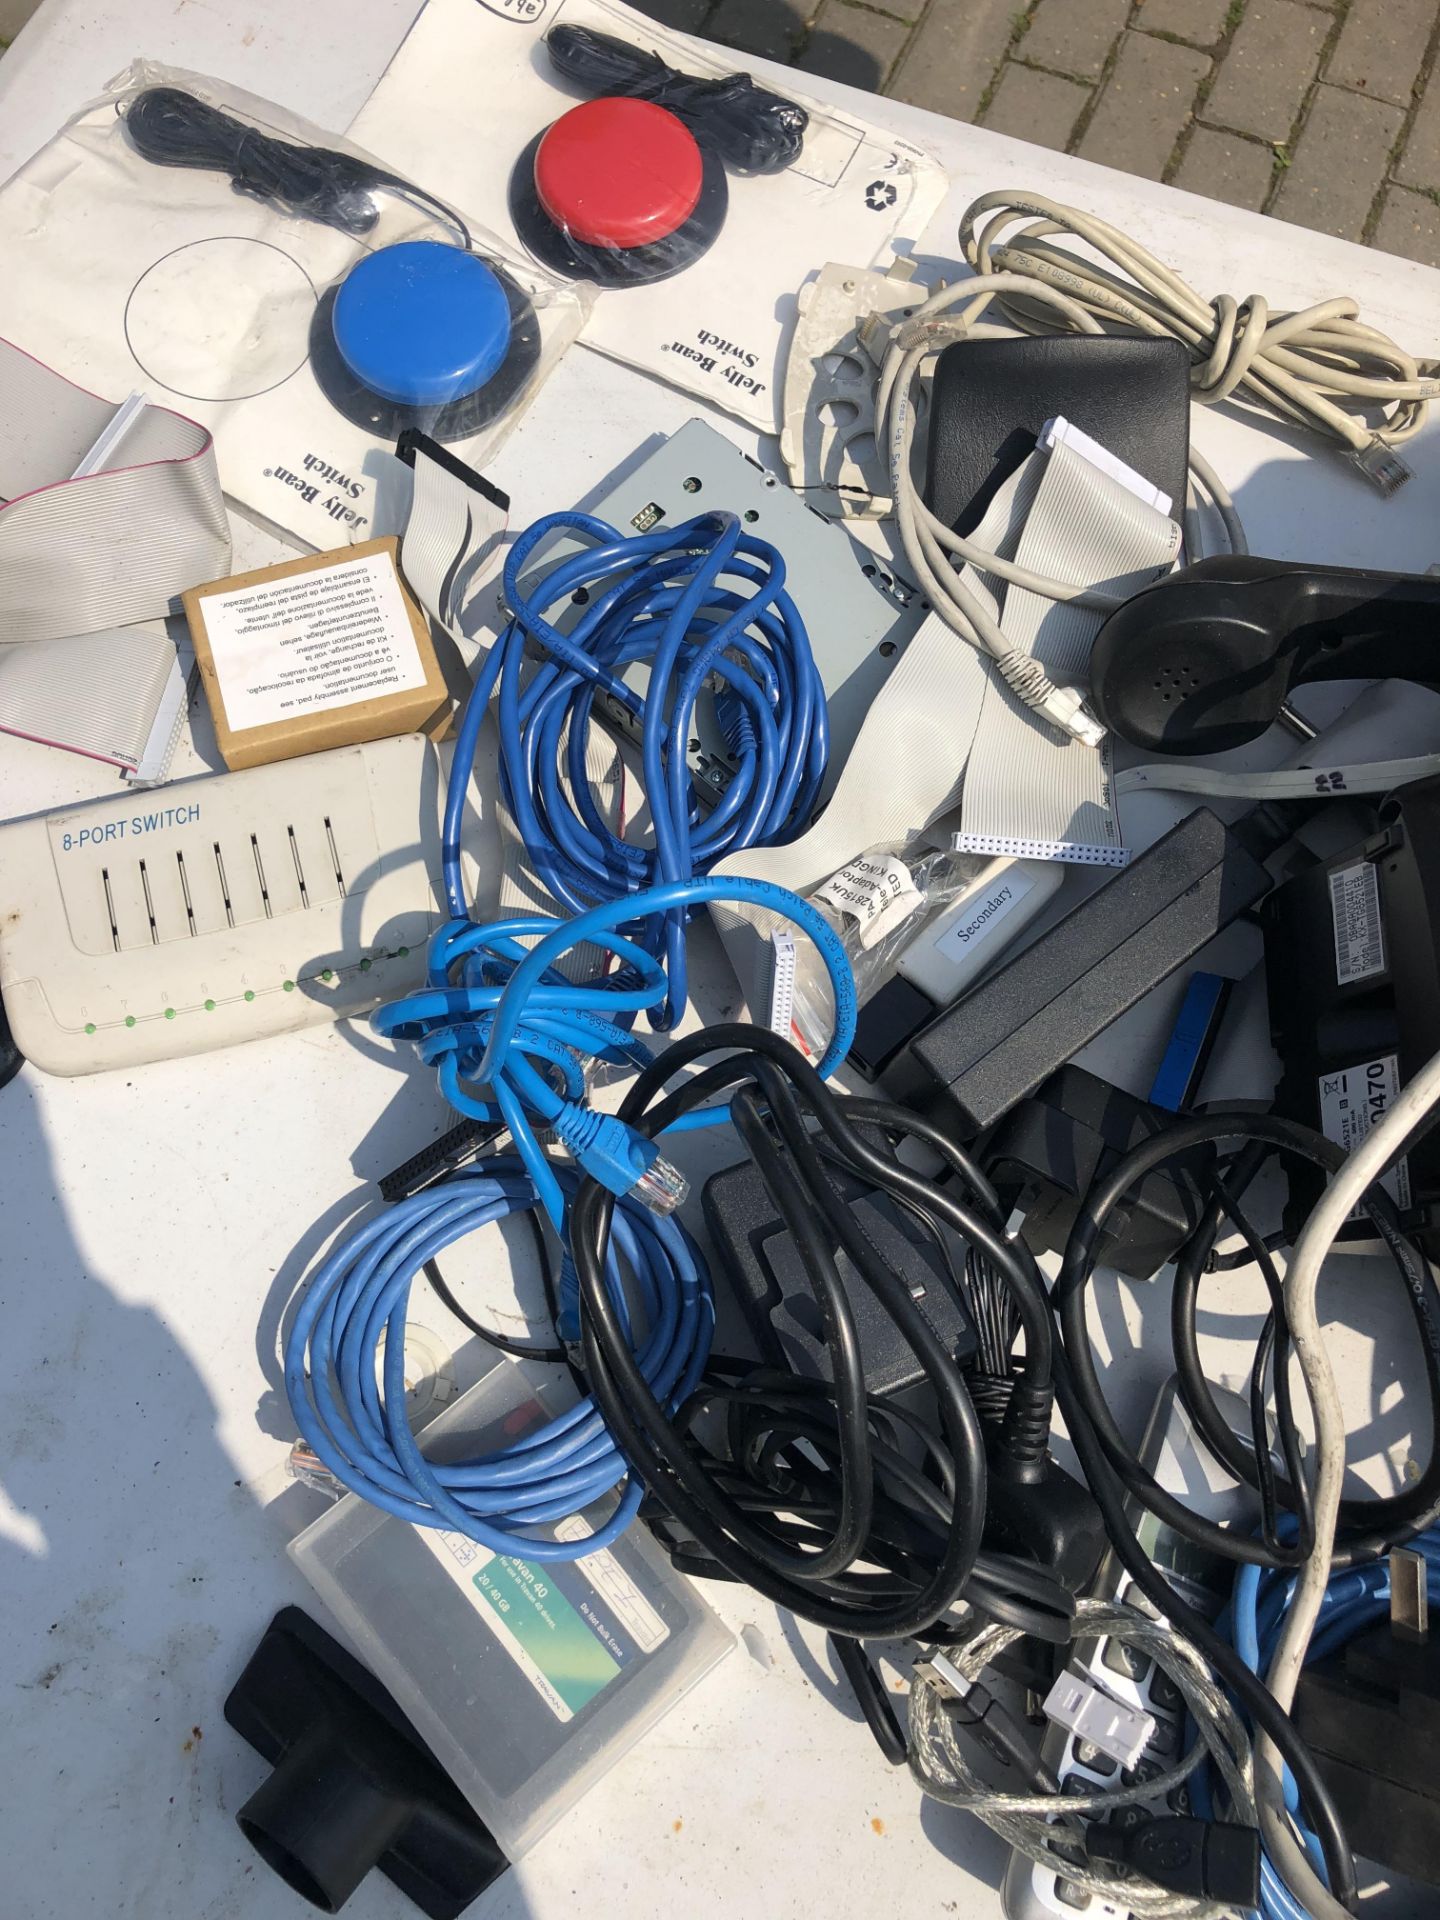 JOB LOT OF OFFICE EQUIPMENT INCLUDES PHONES MODEMS ETHERNET CABLES LAPTOP CHARGERS ETC - Image 4 of 5